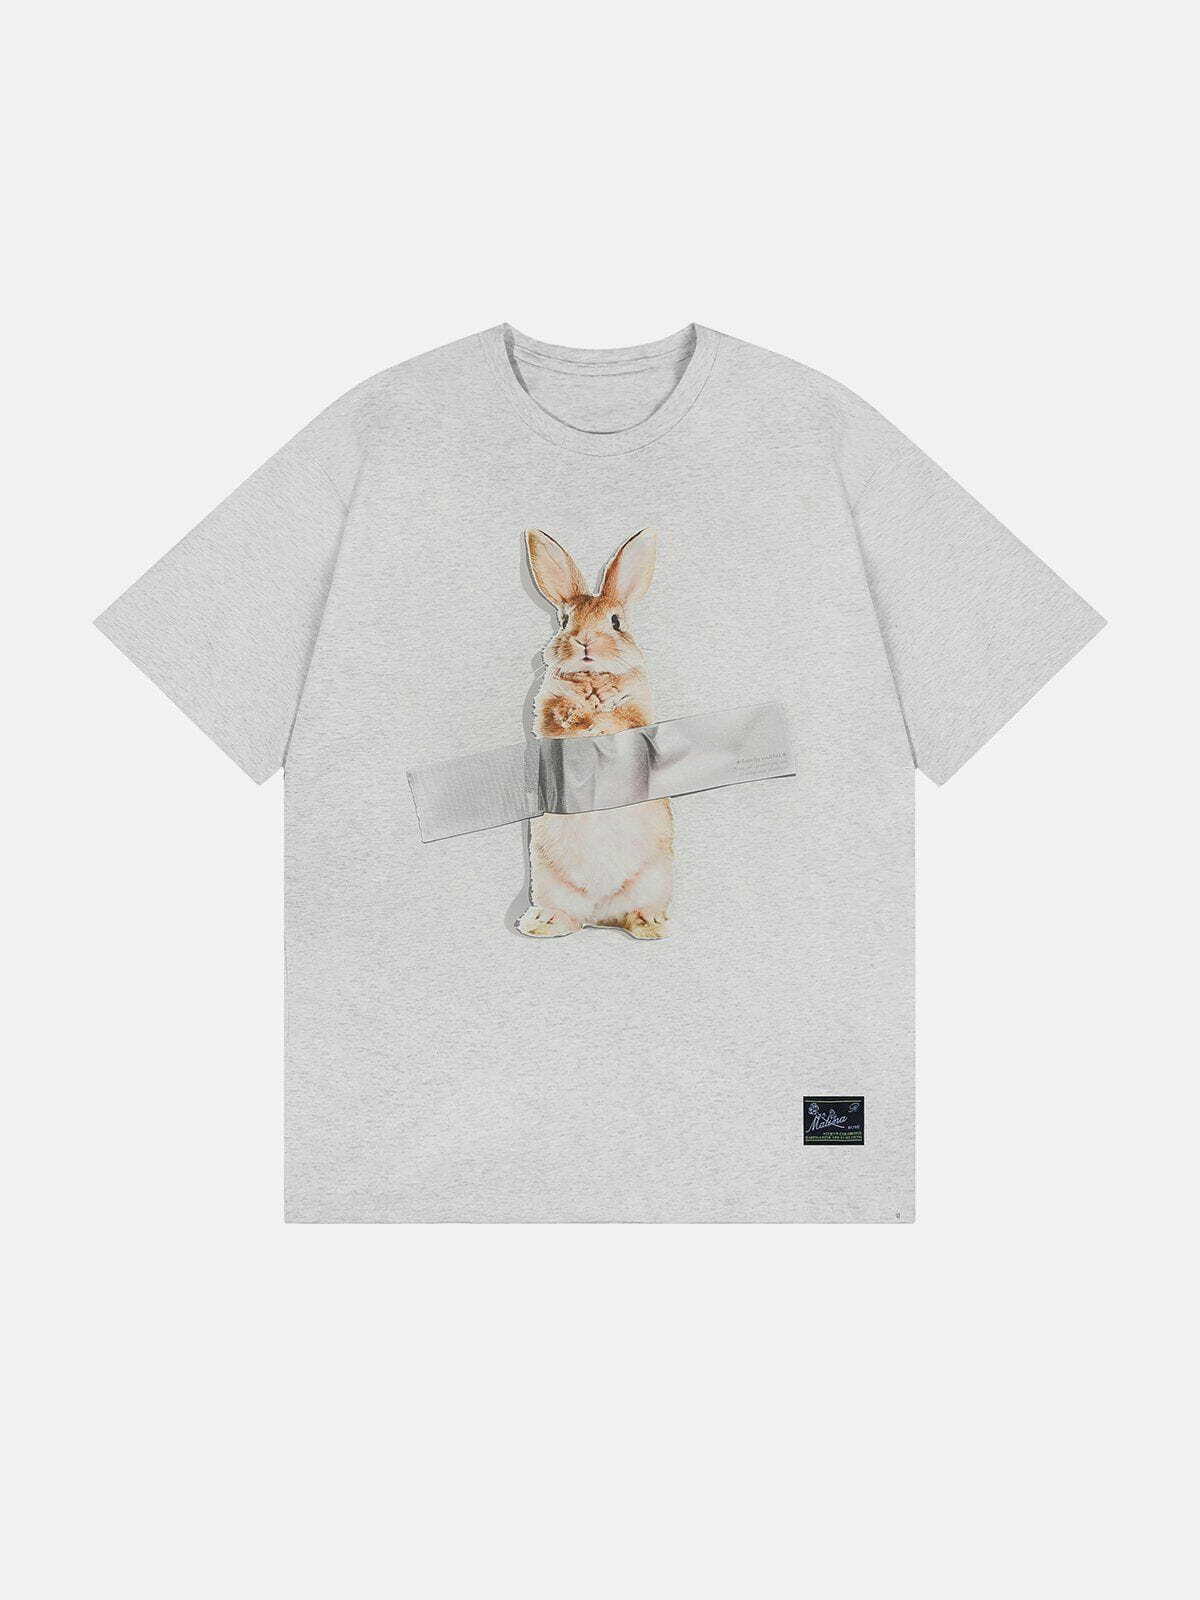 quirky rabbit print tee playful & unique streetwear 4360